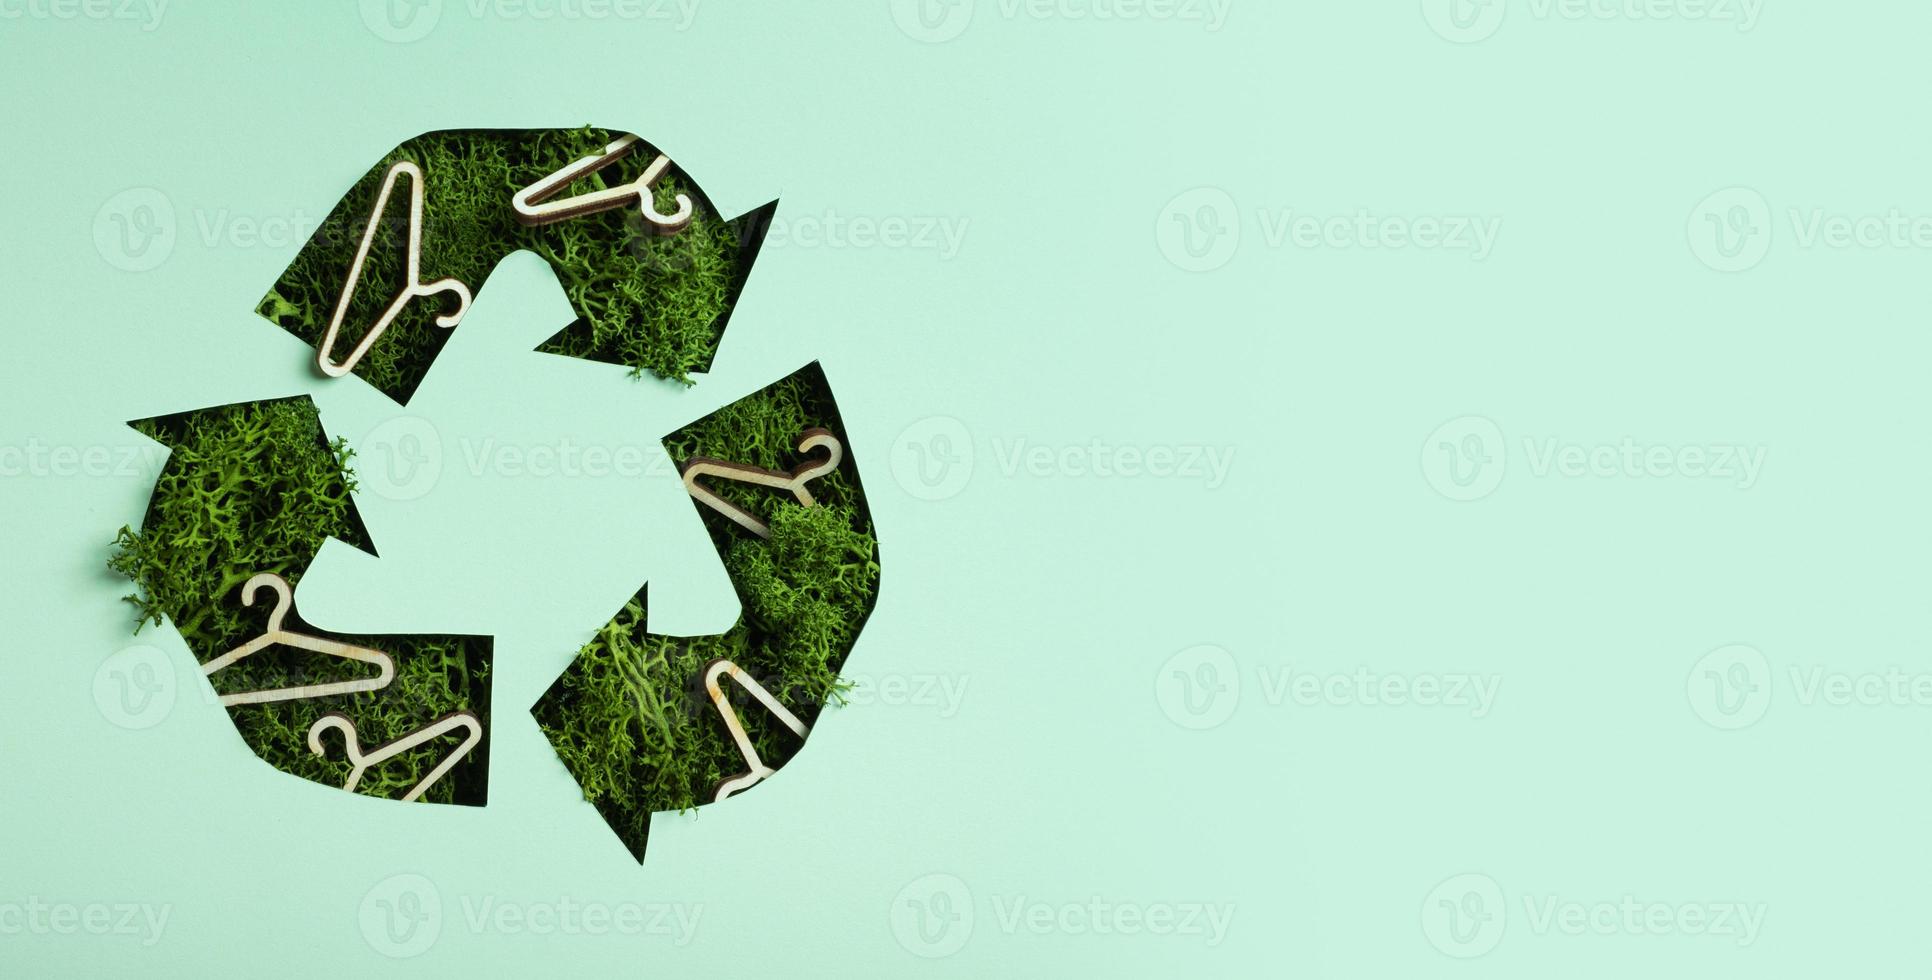 Green moss and hangers under paper cut recycling symbol. Fast fashion, slow fashion, recycling cloth concept photo